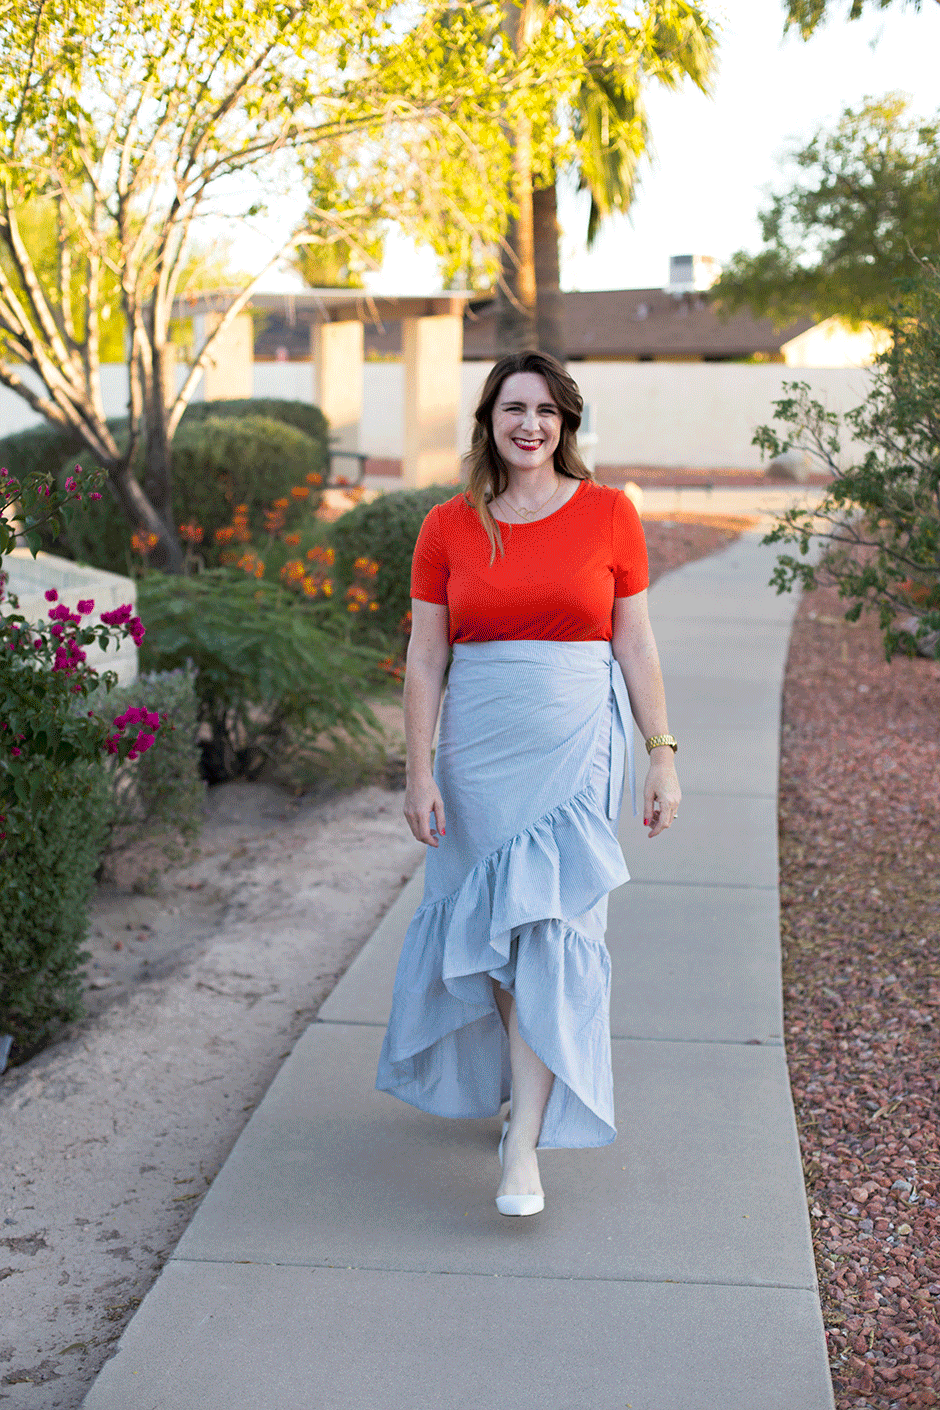 Copy one of the trendiest looks this year with a DIY ruffle hem wrap skirt! Ruffles are everywhere and this one is SO easy to replicate. Read on for the full sewing tutorial with step by step photos and instructions. Bonus: it fits a myriad of sizes!